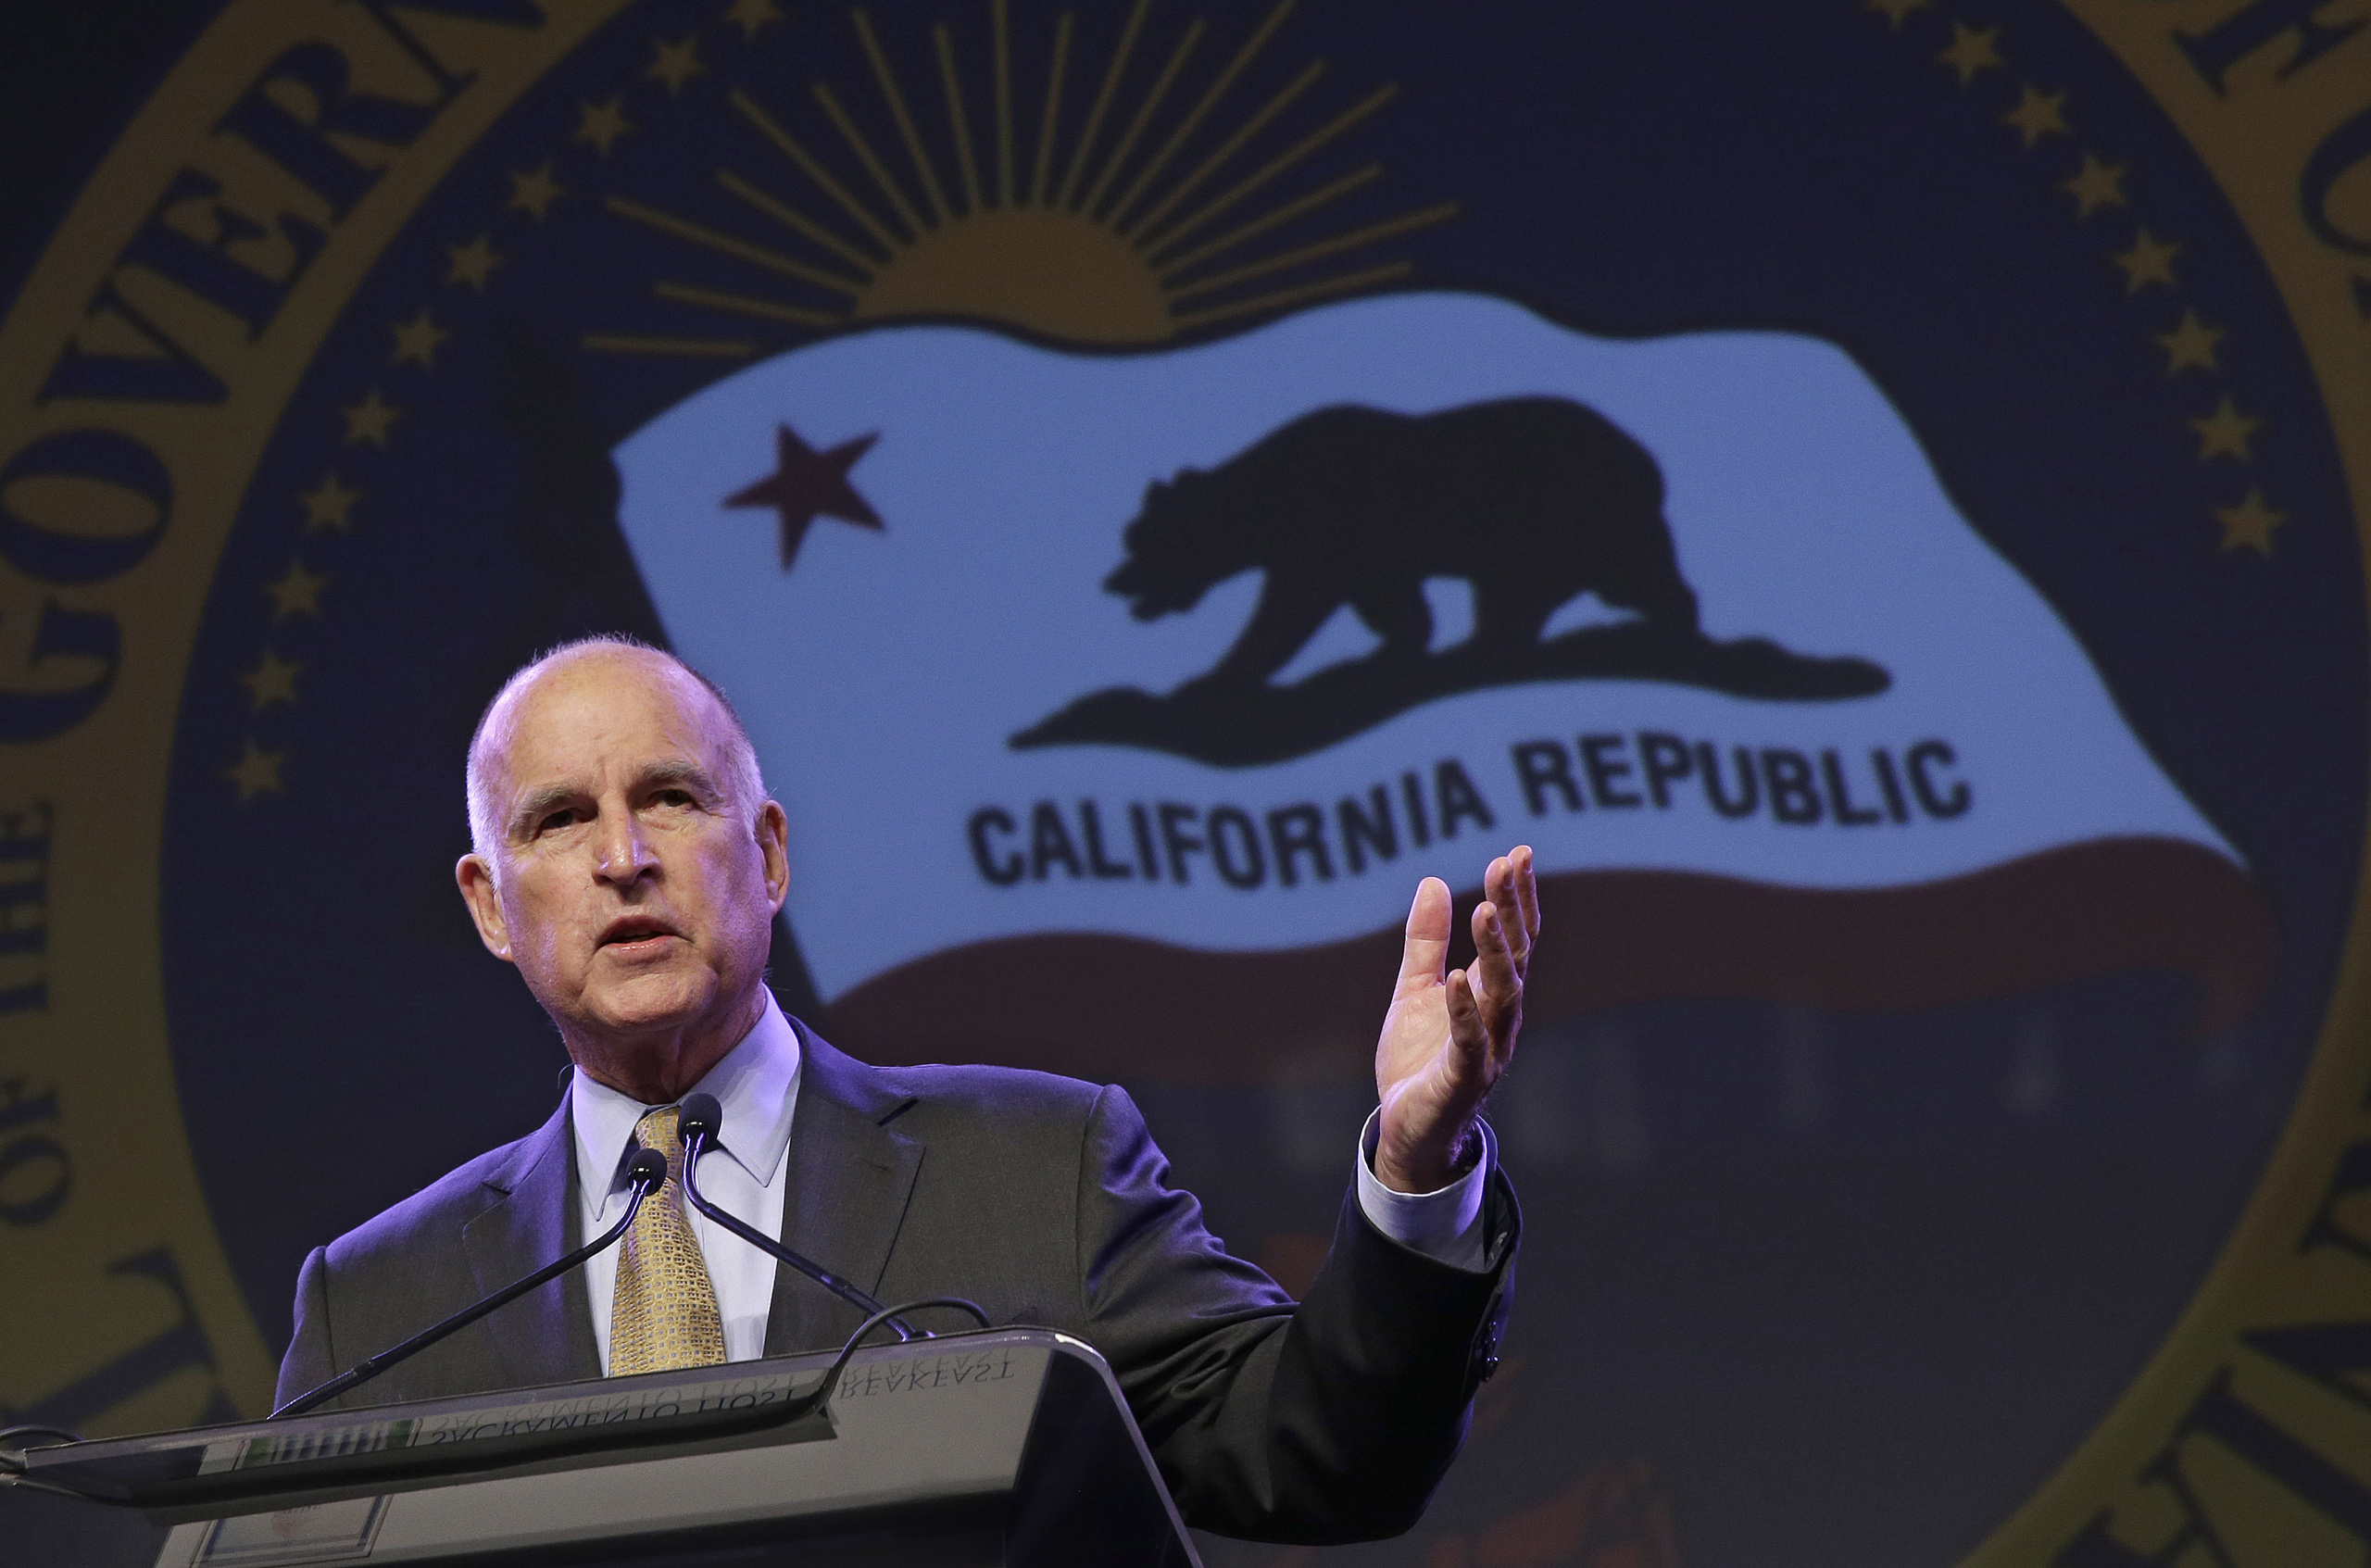 California Gov. Jerry Brown gestures as he speaks at the 91st Annual Sacramento Host Breakfast in Sacramento, Calif on May 18, 2016. (Rich Pedroncelli—AP)